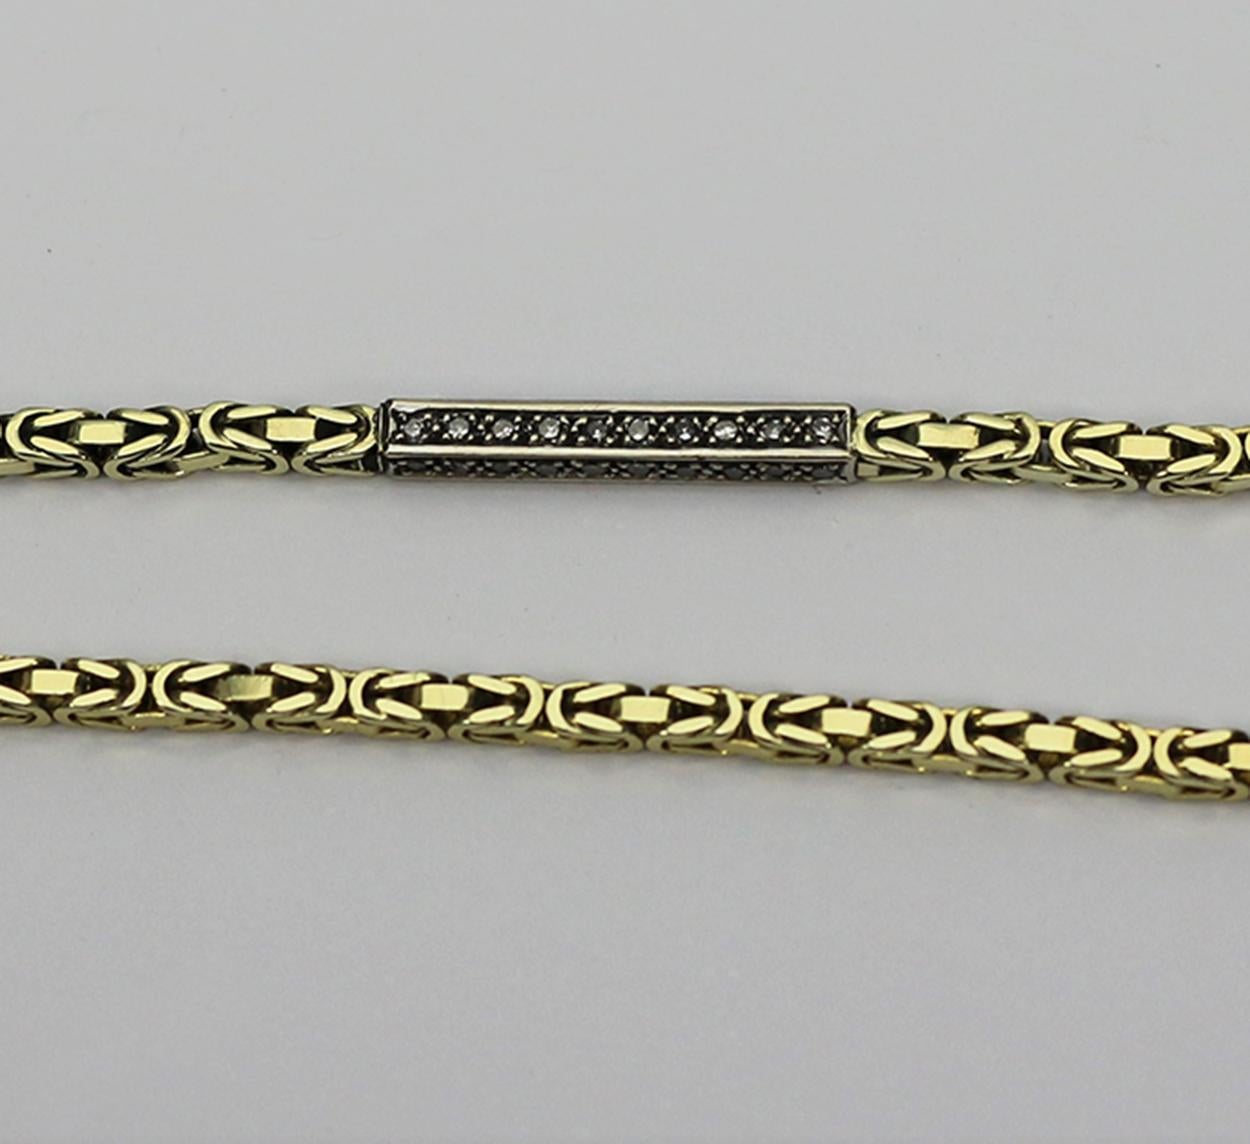 Custom-made king's chain with 4 intermediate pieces in each of which 40 diamonds are set in white gold. The diamonds are on all 4 sides of the chain. The chain is endless, so it has no clasp. The master goldsmith made the intermediate pieces himself